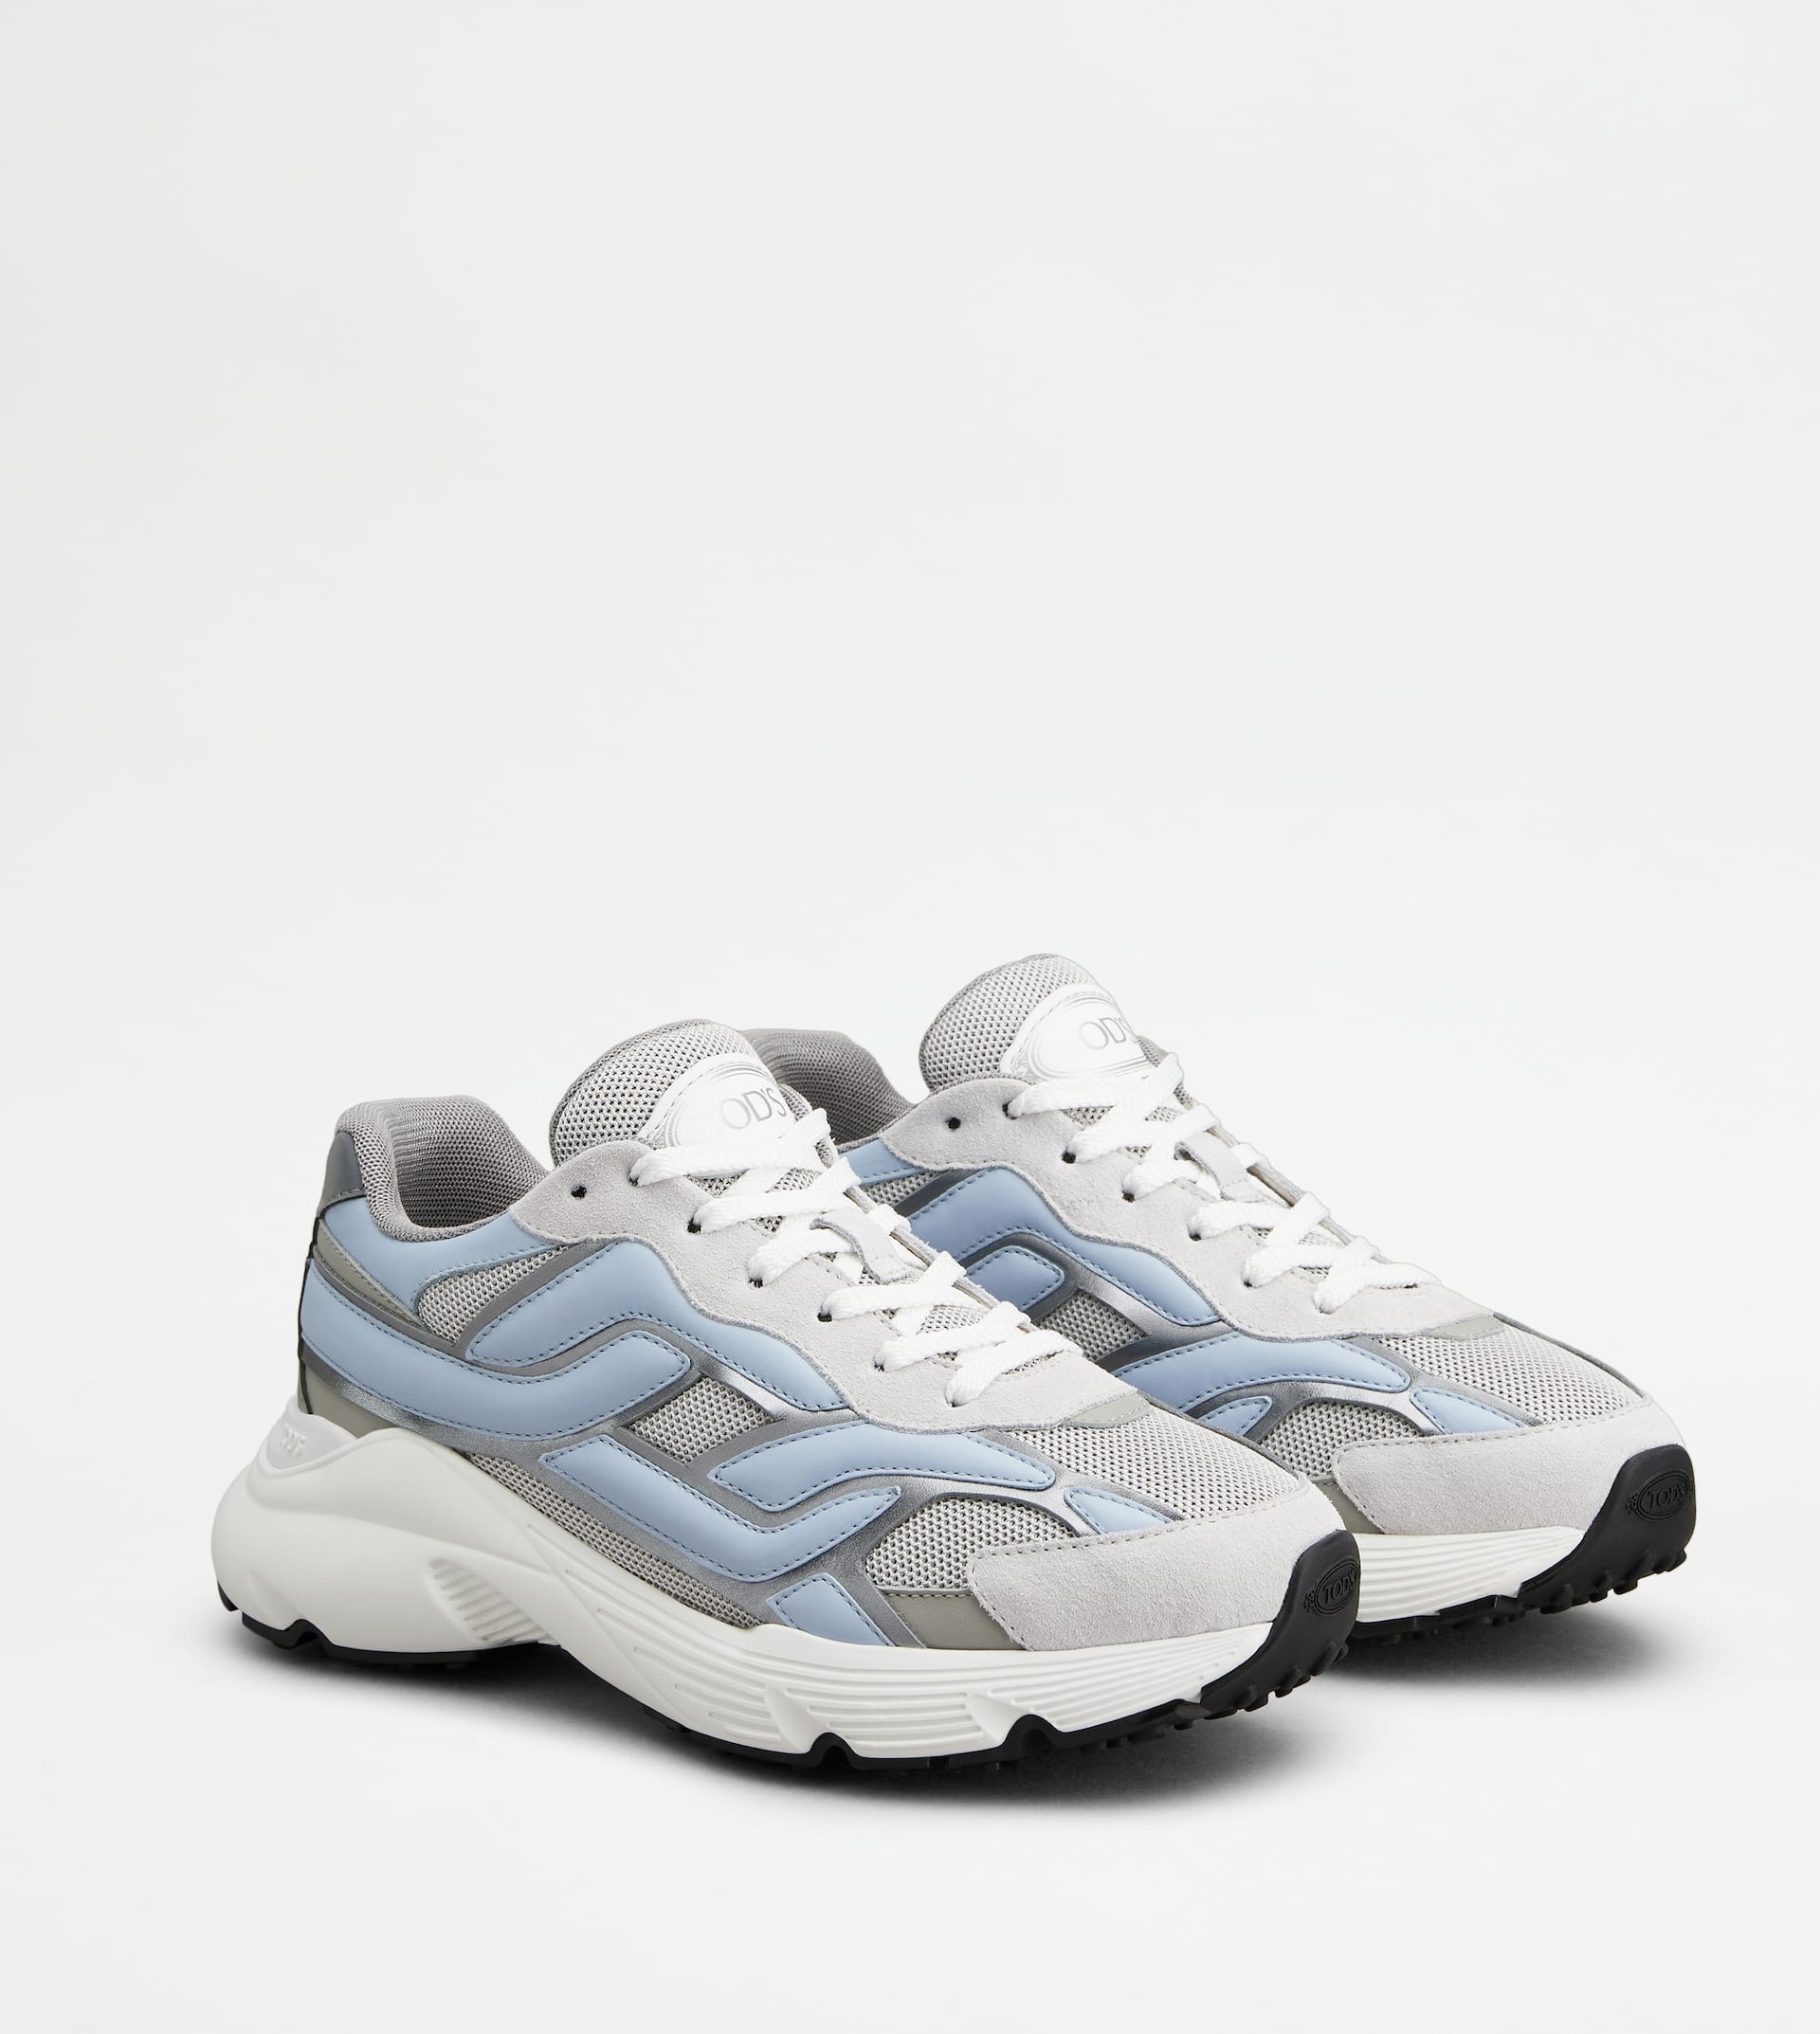 SNEAKERS IN LEATHER AND TECHNICAL FABRIC - SKY BLUE, GREY - 3